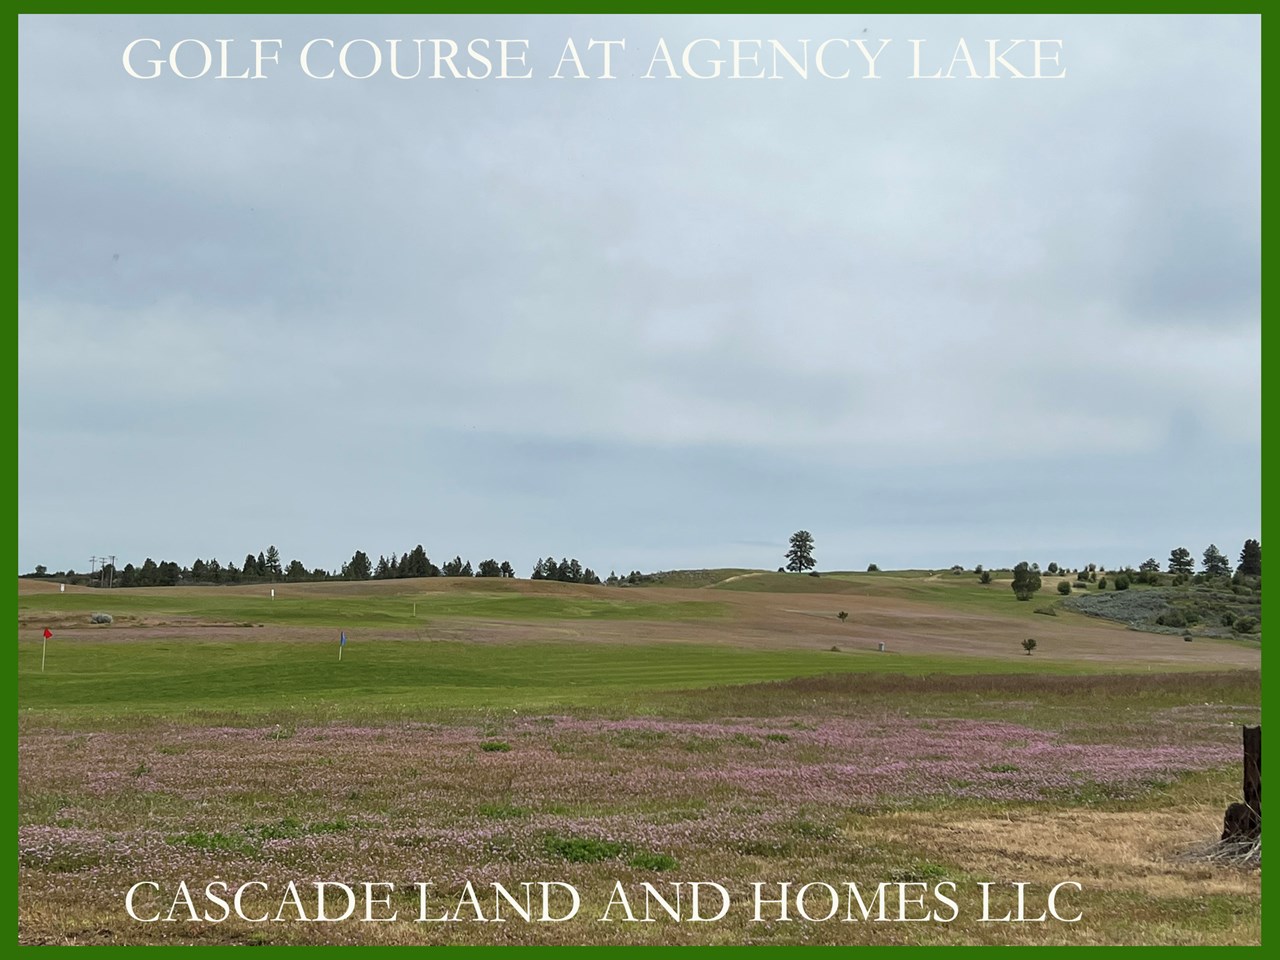 this is the dmolo golf facility at agency lake! there are also several golf courses in klamath falls, including the harbor links golf course, the shield lake golf club and the arnold palmer signature course at the running y resort!